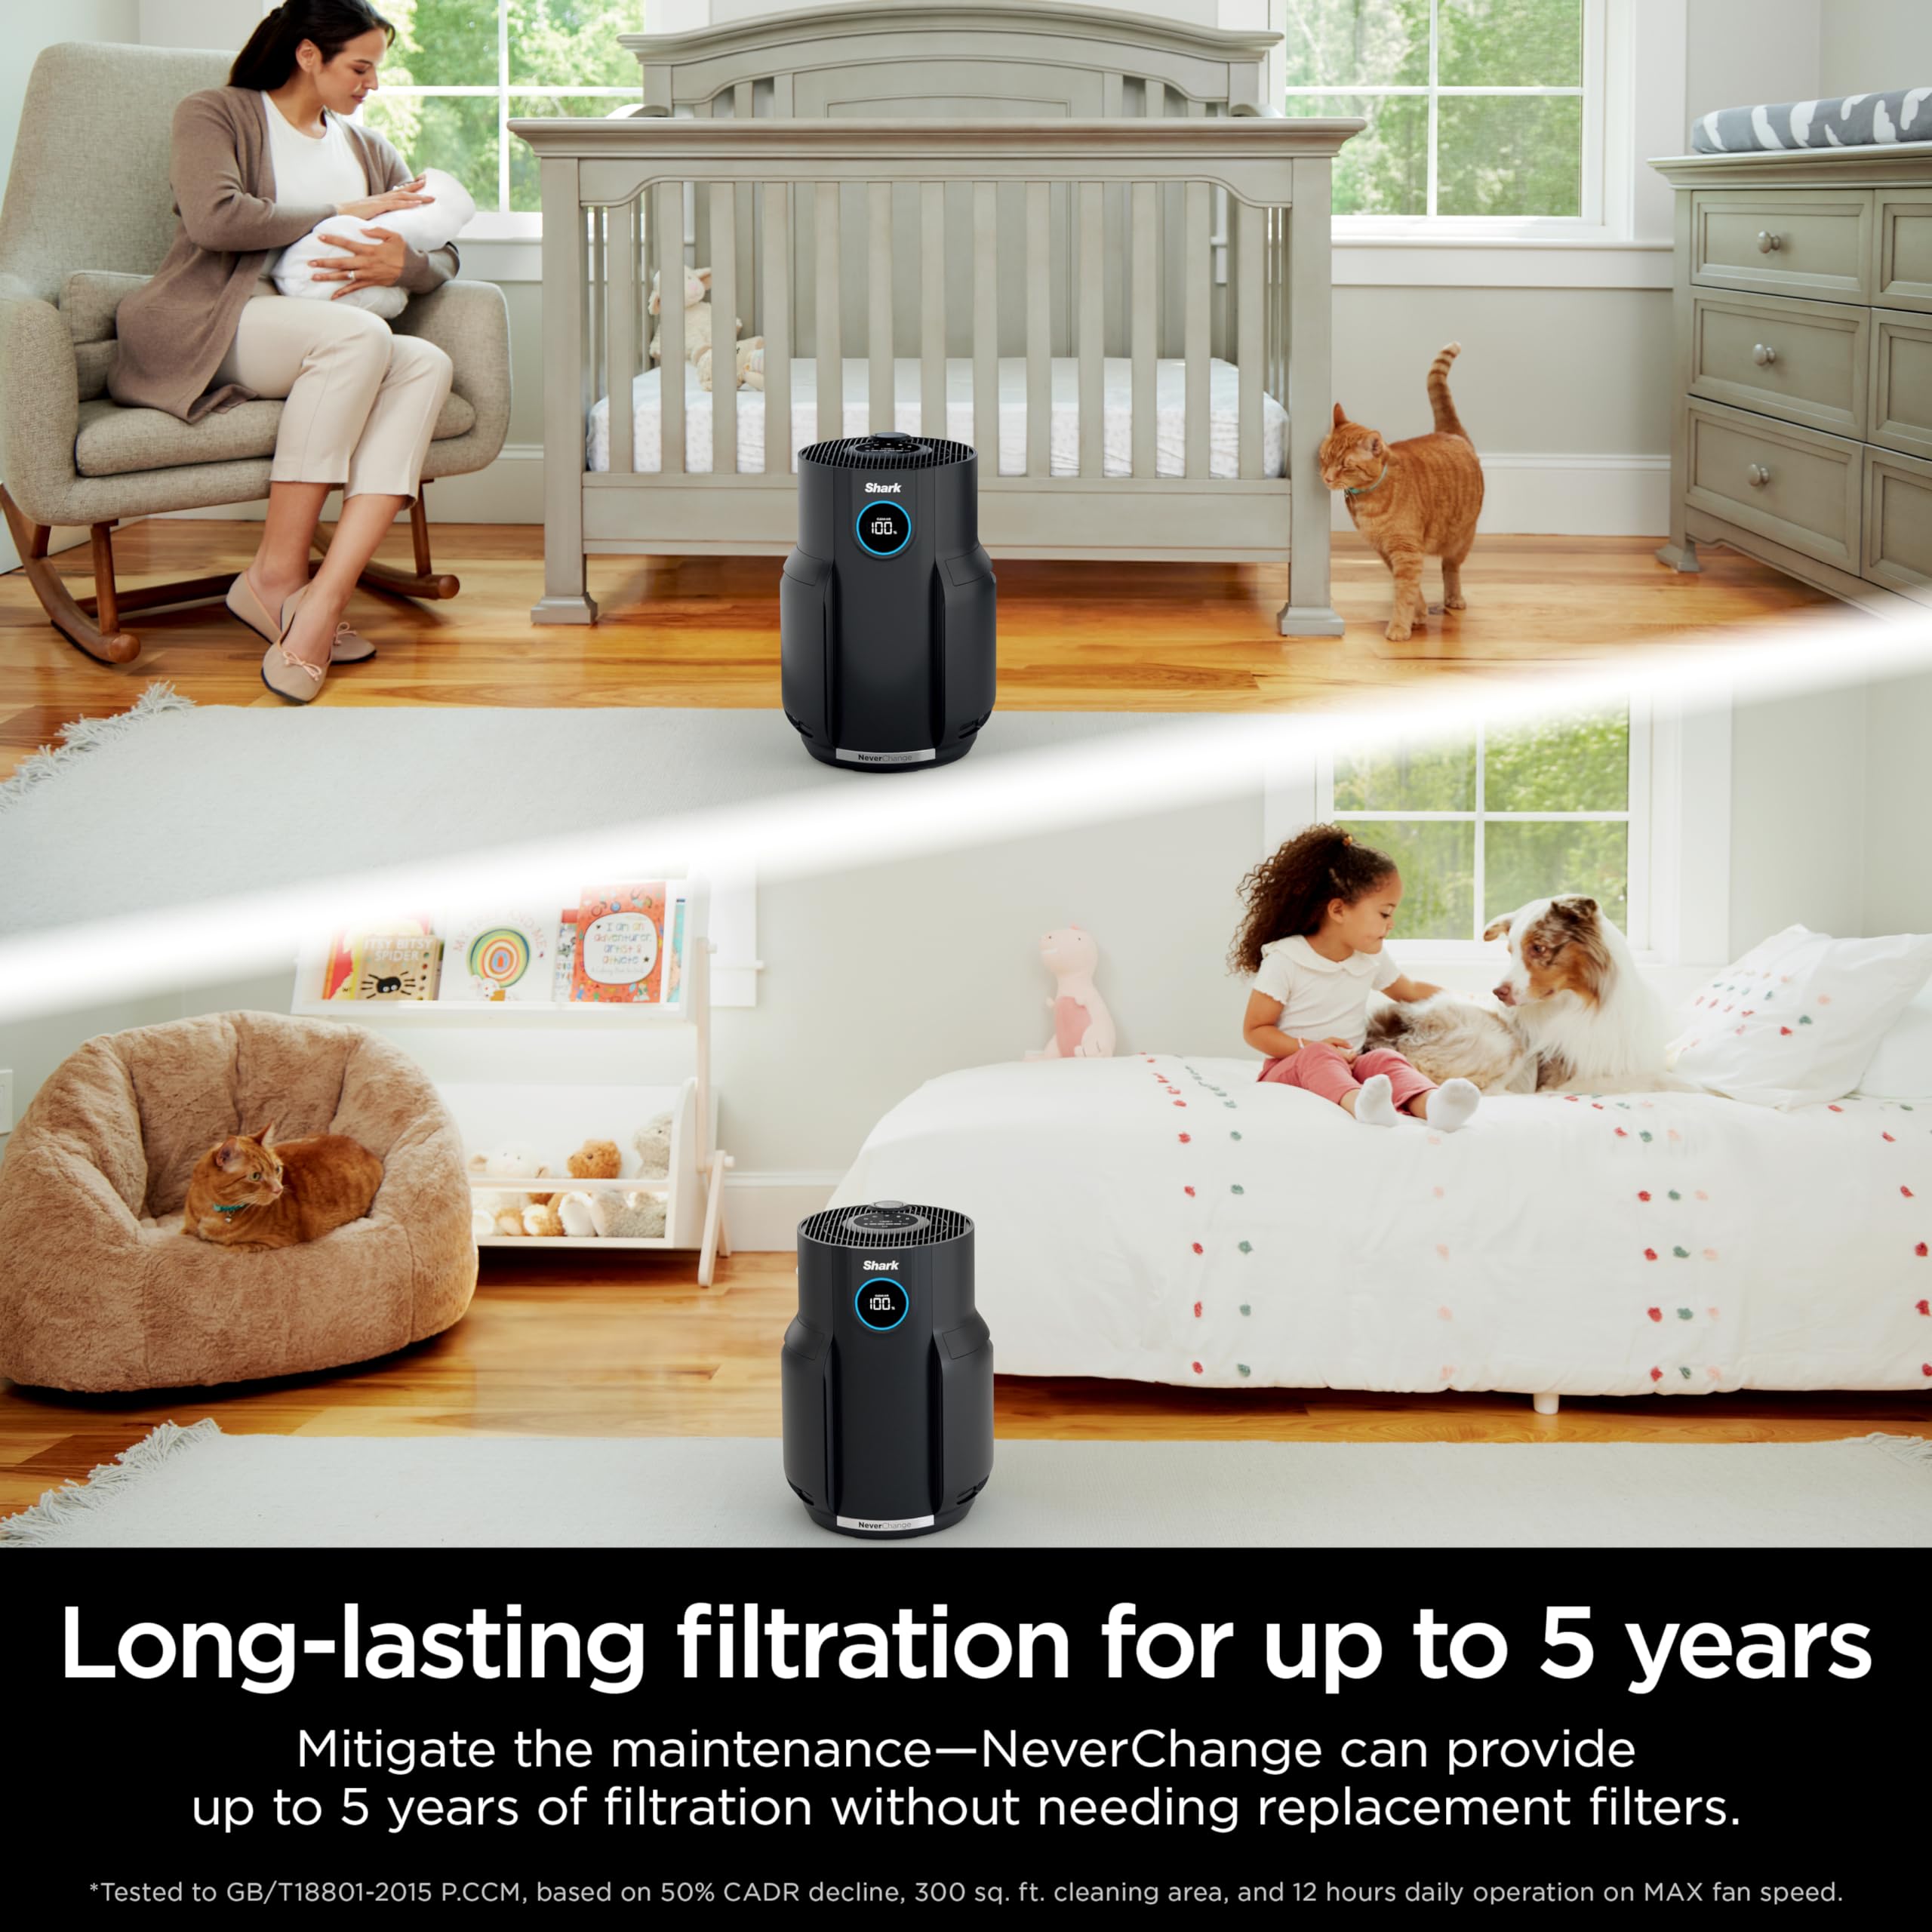 Shark HP152 NeverChange Air Purifier, 5-year filter, save $300+ in filter replacements, Large Room, 650sq. ft., Odor Neutralizer Technology, captures 99.98% of particles, dust, smells, Charcoal Grey